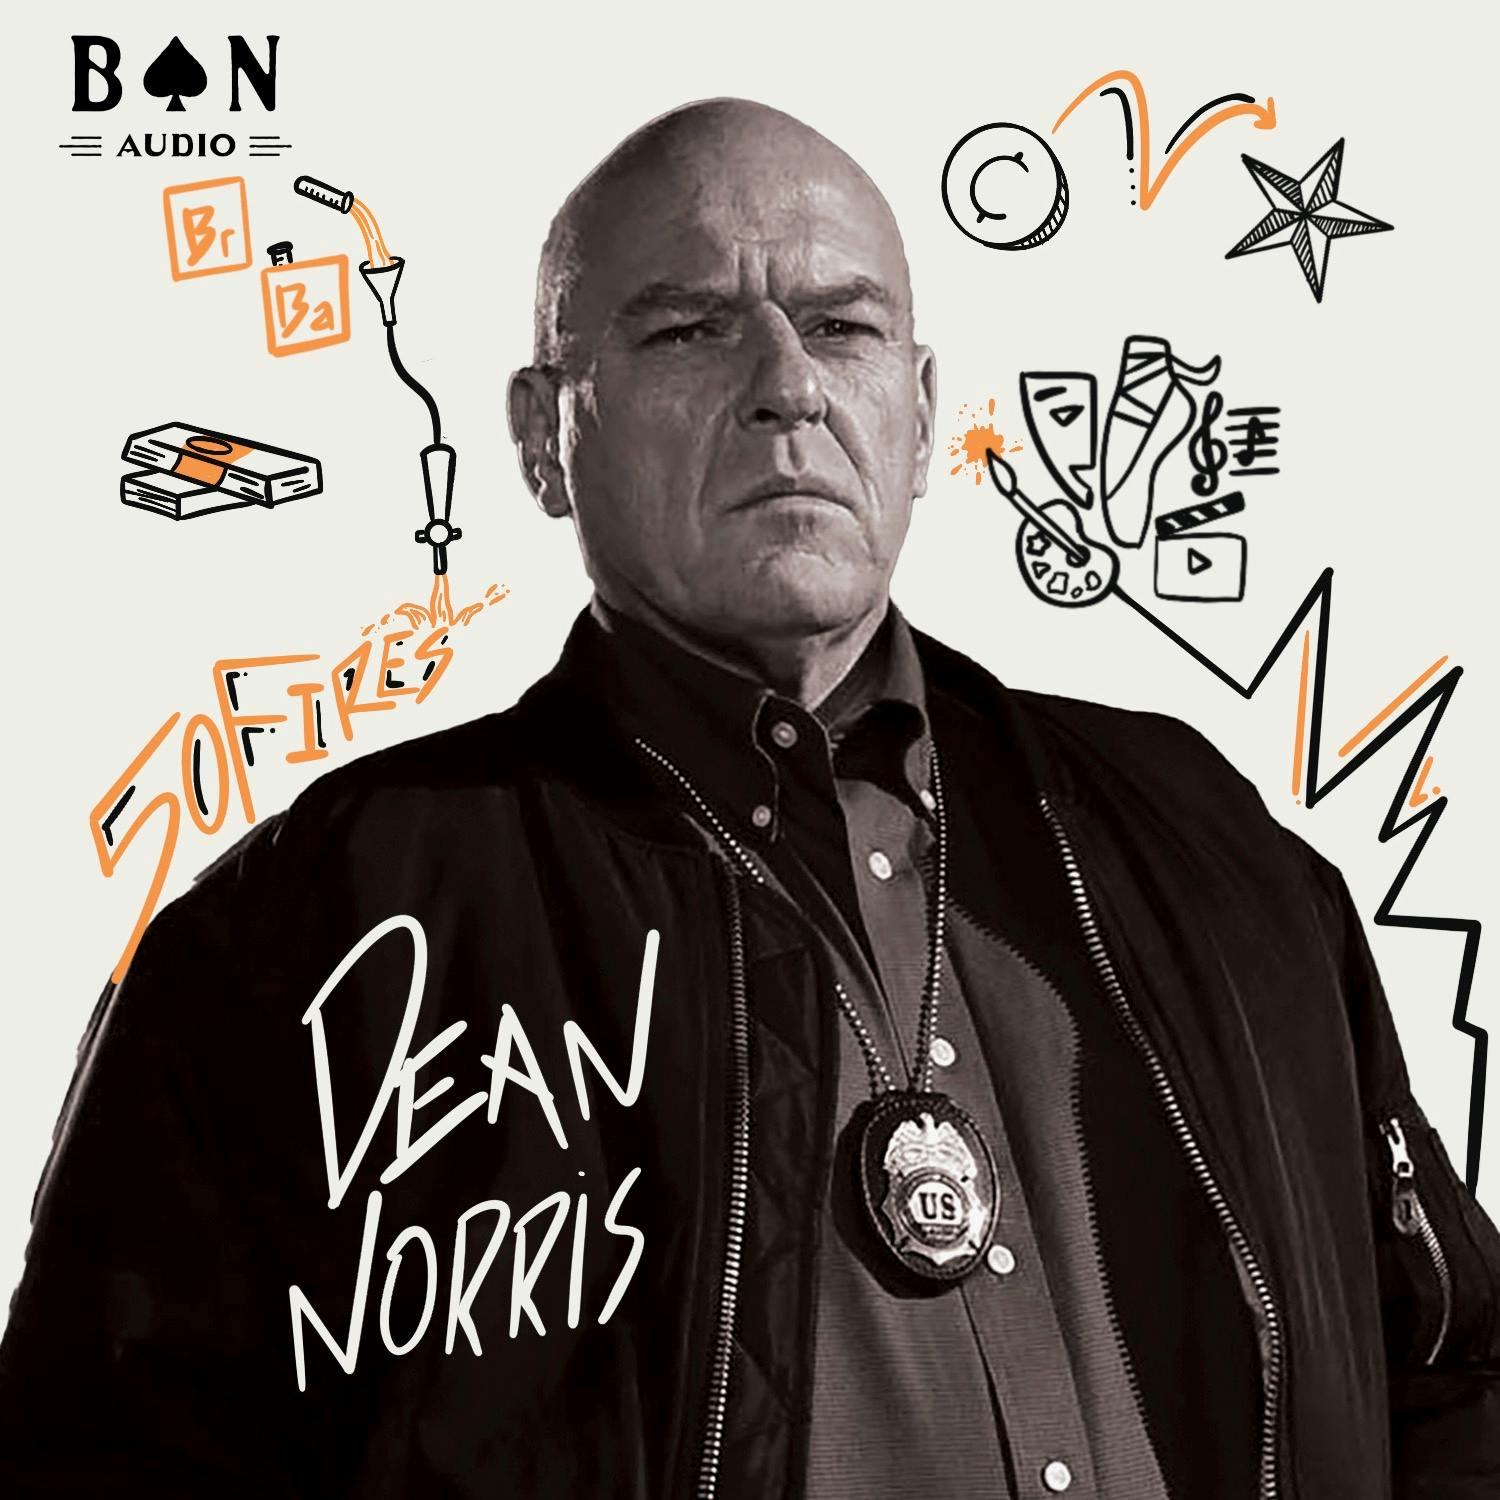 Breaking Bad’s Dean Norris Has Always Lived Within His Means